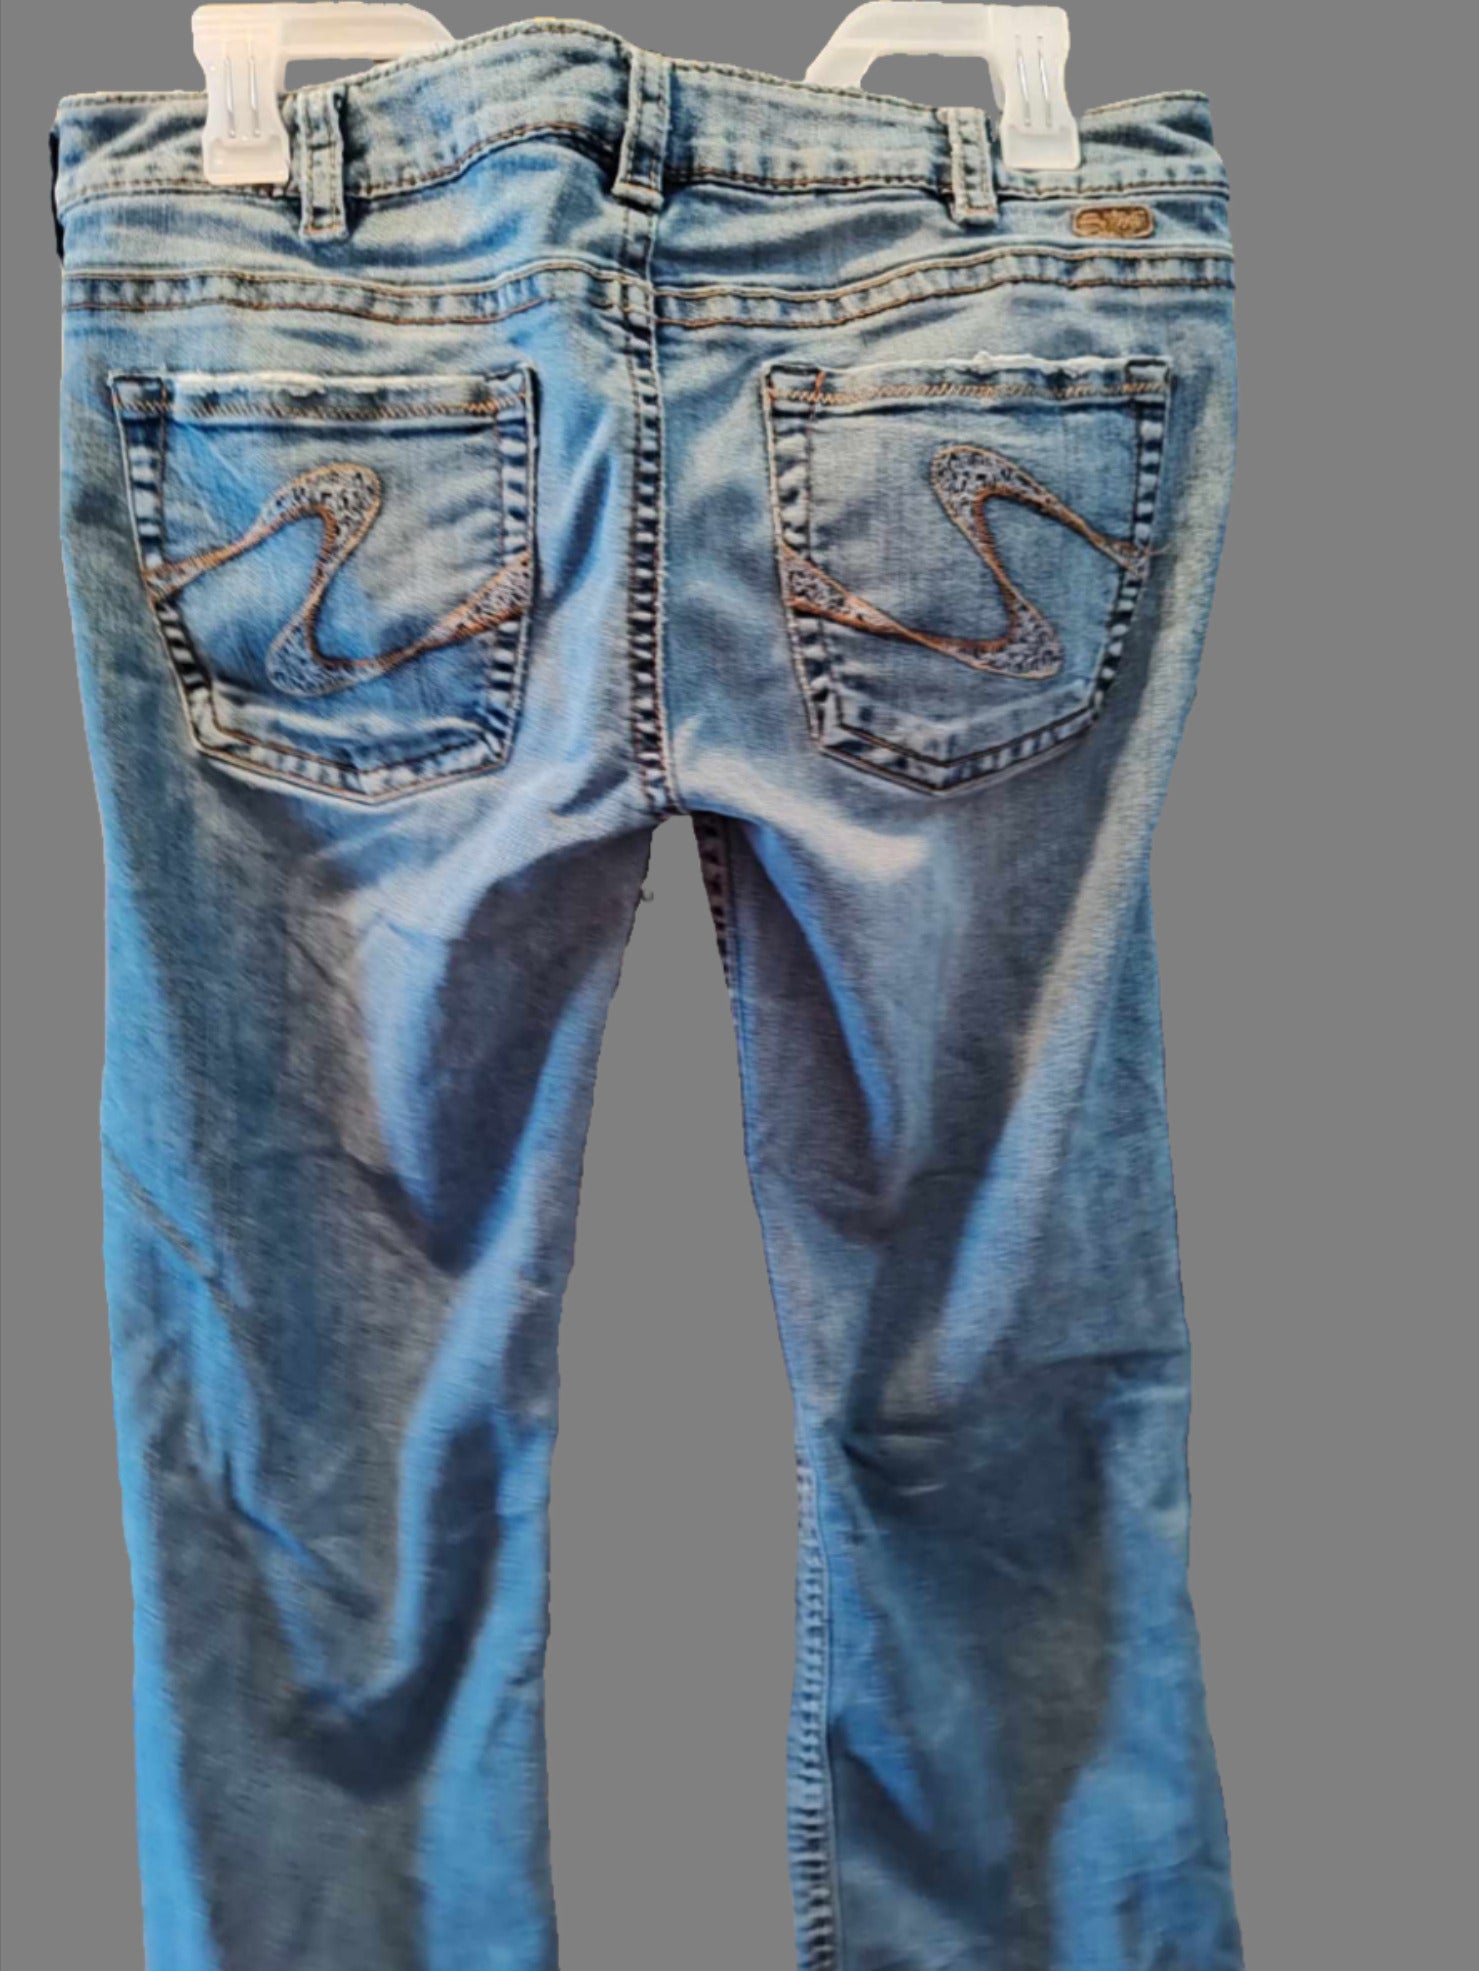 Women's Silver Blue Jeans with Wide Legs - preowned